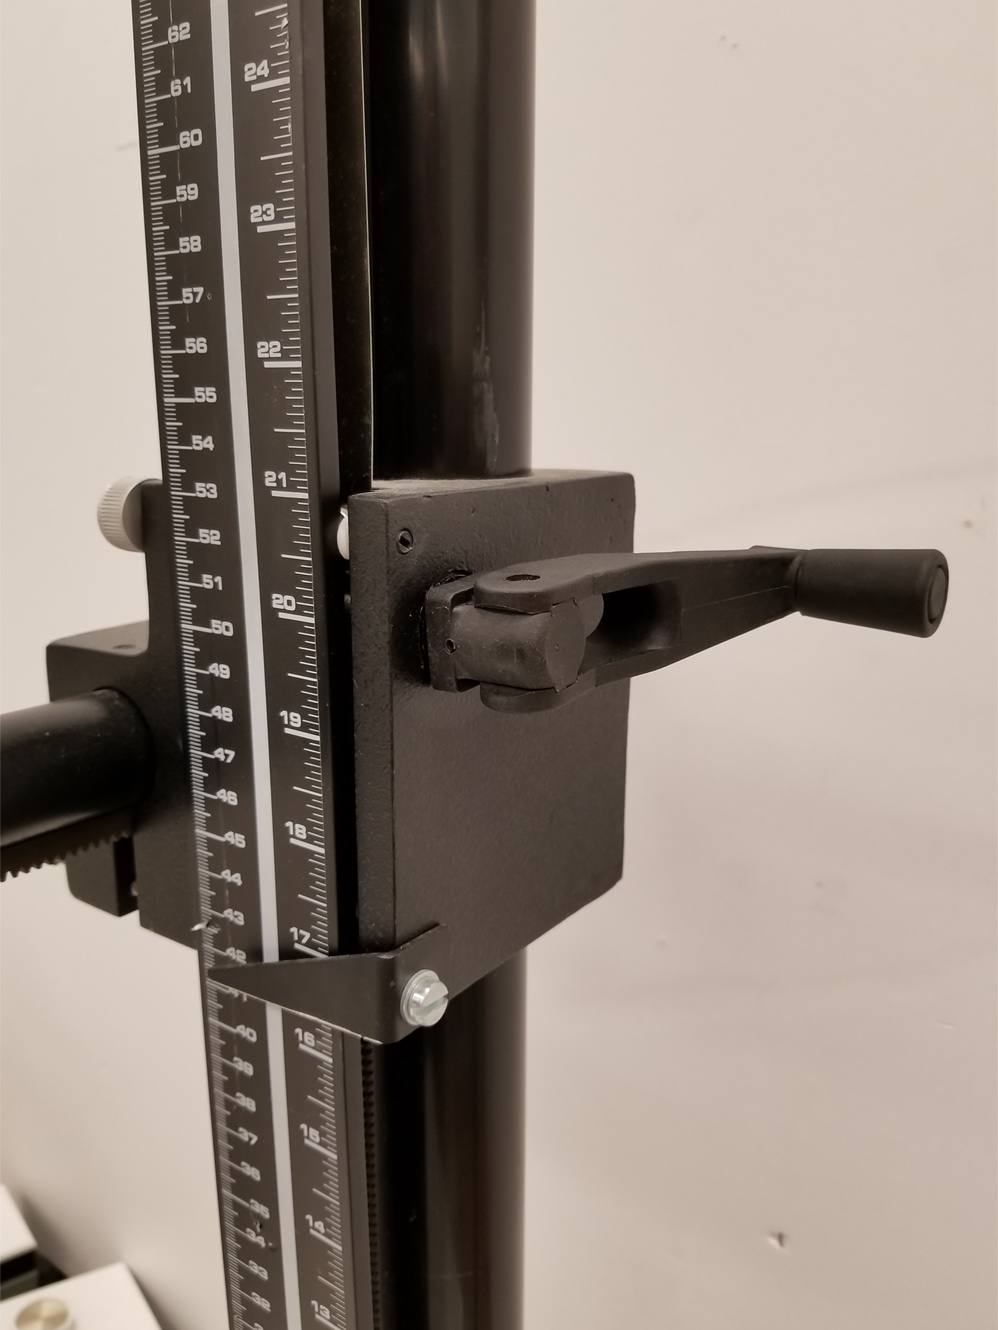 Image shown of Copy Stand hand crank for raising and lowering the height of the camera.